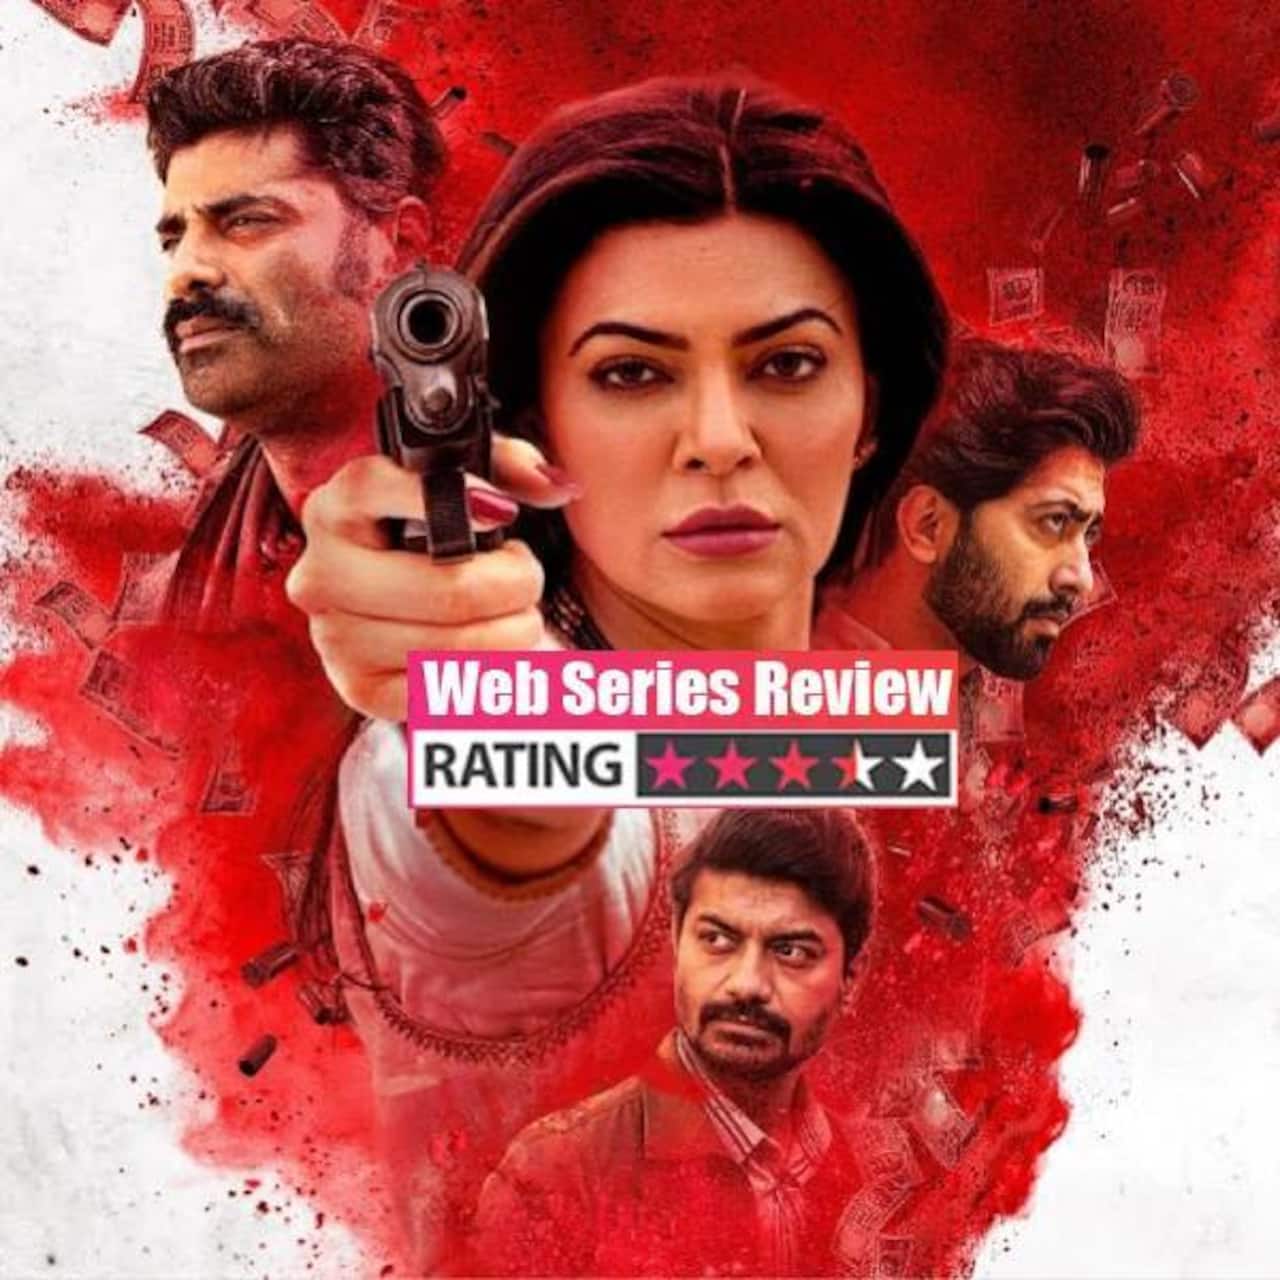 Aarya season 2 web series review: Sushmita Sen manages to outdo herself from season 1 in Ram Madhvani's compelling crime thriller